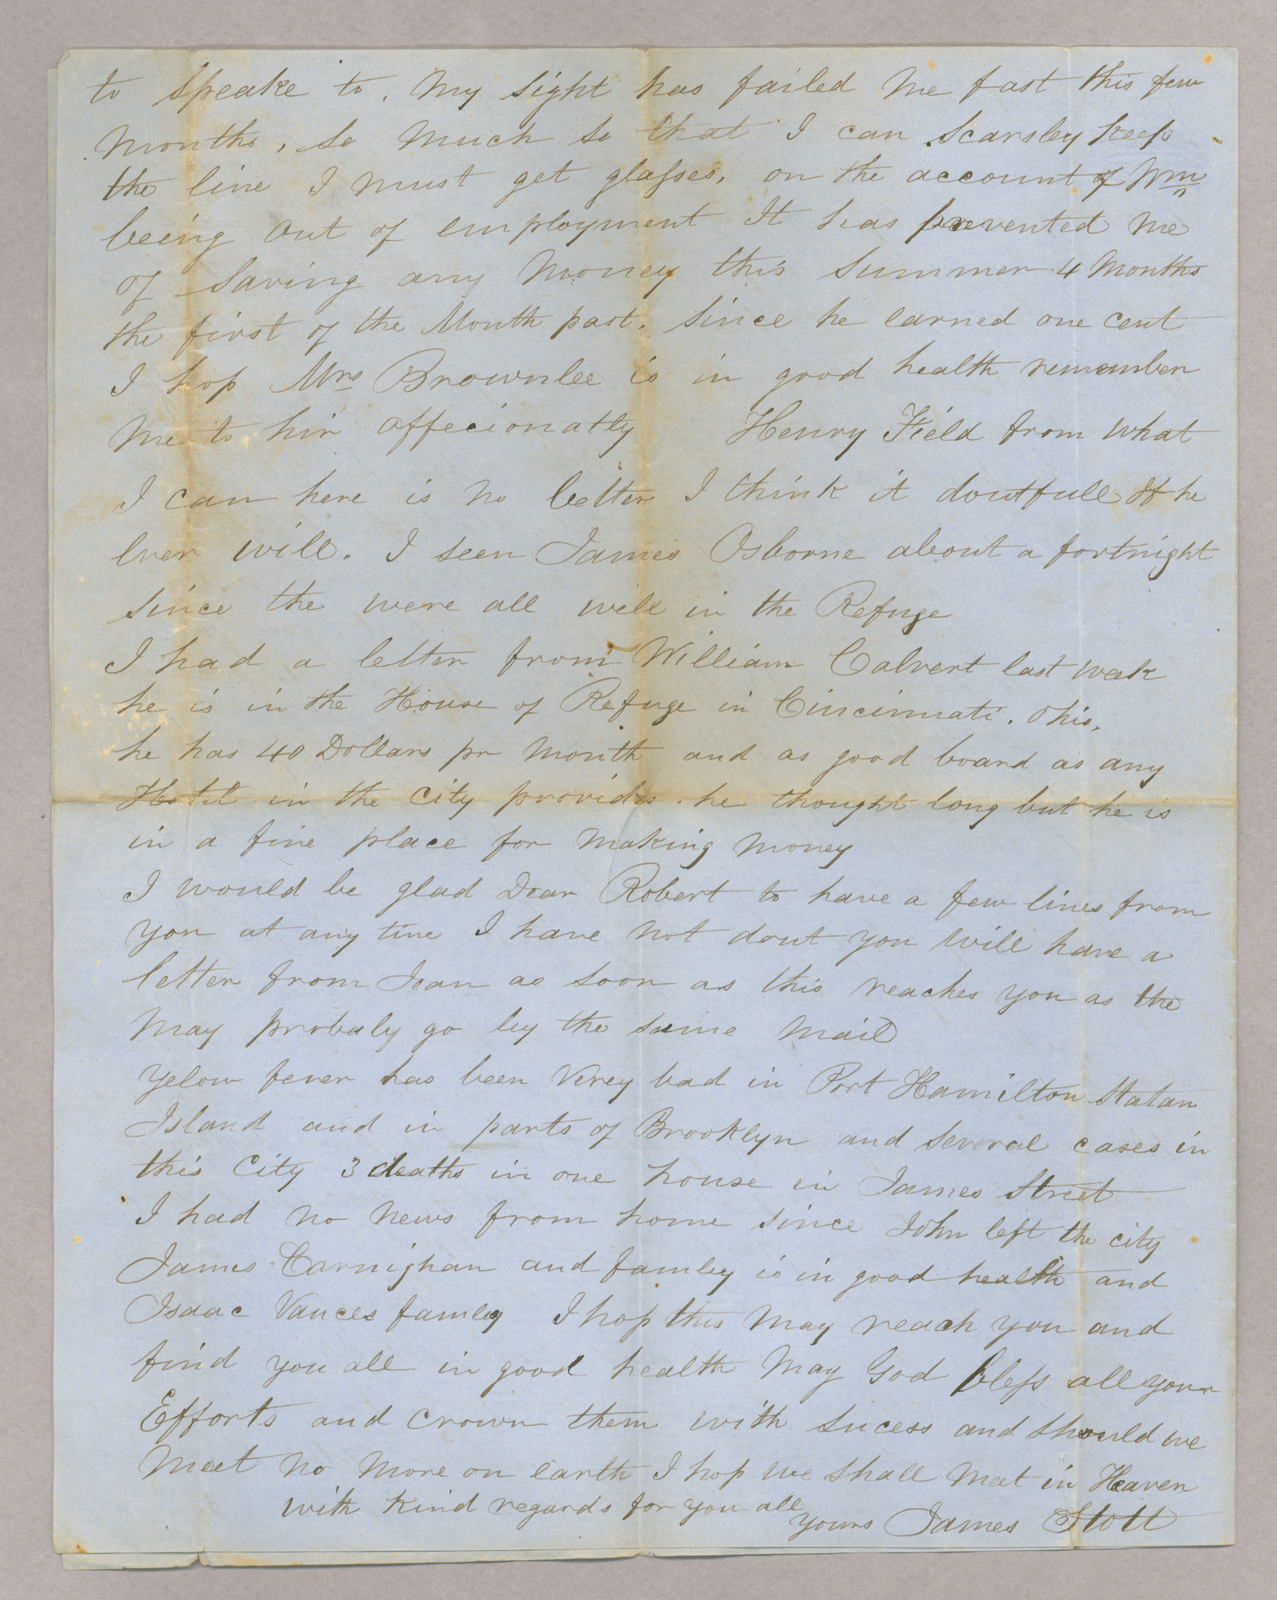 Letter. James Stott, New York, New York, to "Dear Robert and Mrs. Brownlee", n. p., Page 2